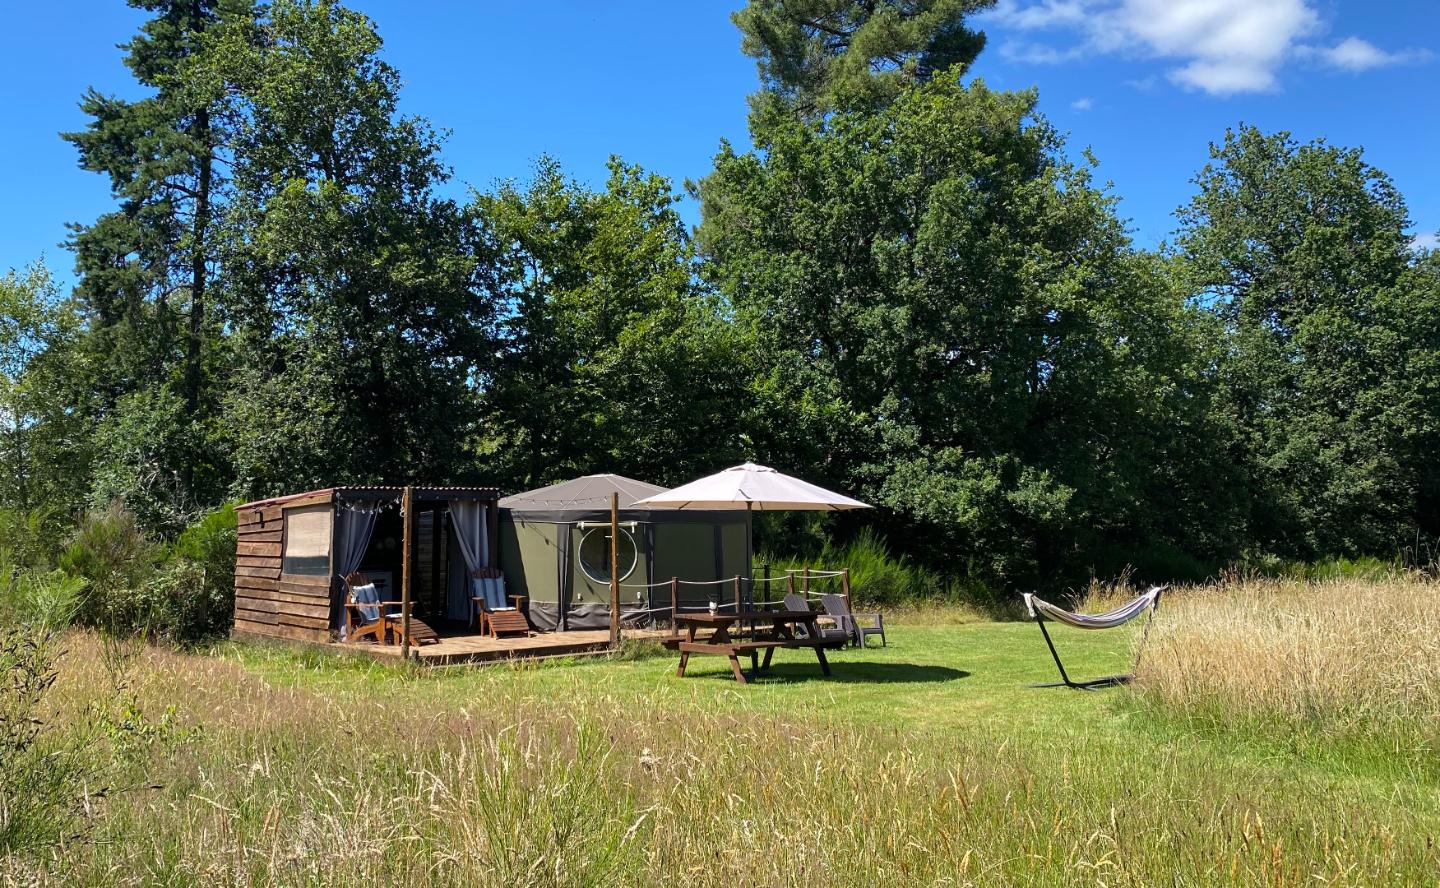 Hôte GreenGo: Le Ranch Camping et Glamping - Image 20